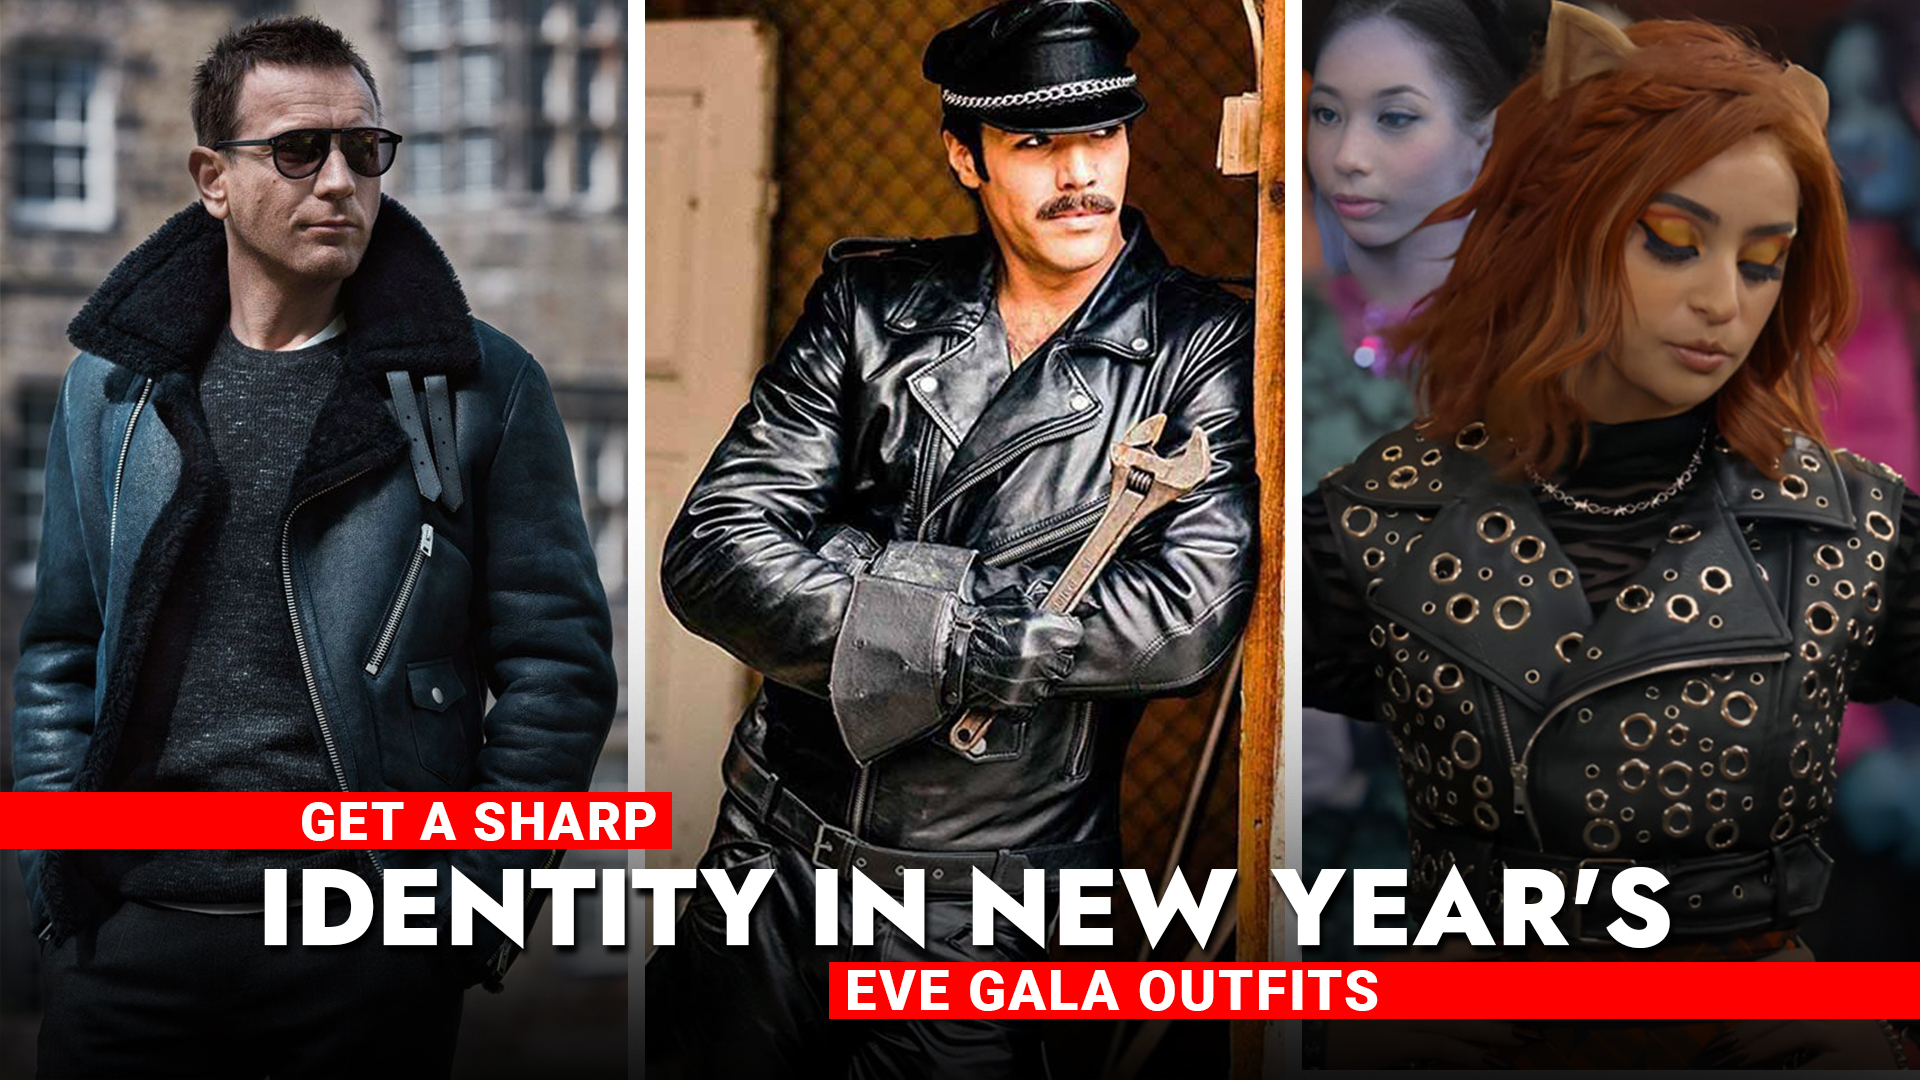 Get A Sharp Identity In New Year's Eve Gala Outfits